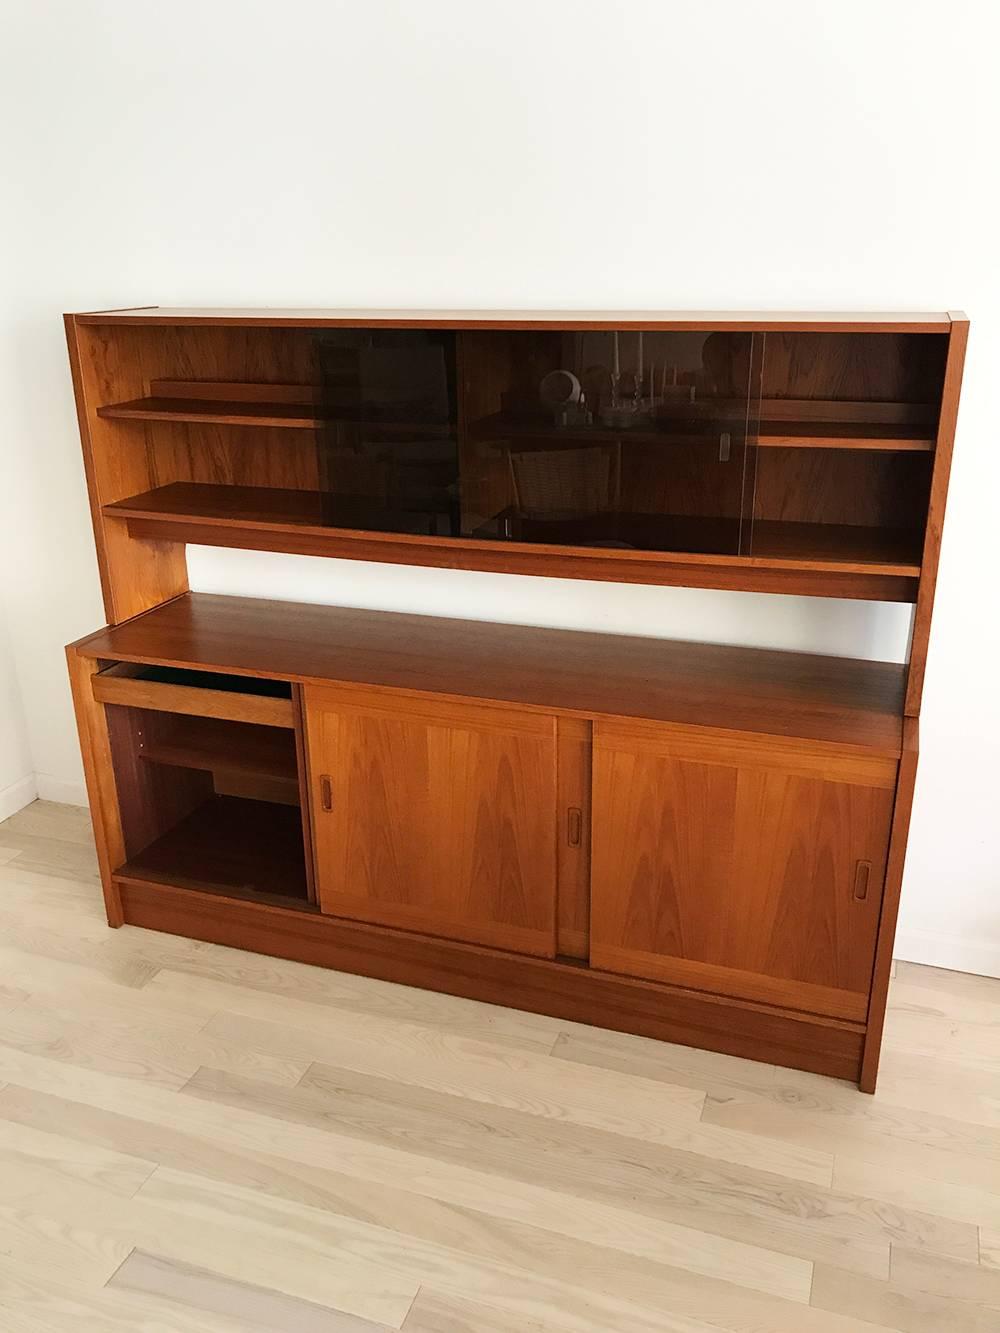 Danish Modern teak sideboard or hutch by Clausen & Son. So much storage with sliding cubbies below and with a felt lined flatware drawer. Pretty wood pulls, rounded teak pulls. Smoked glass sliding hutch doors with hidden back lights. Very clean and